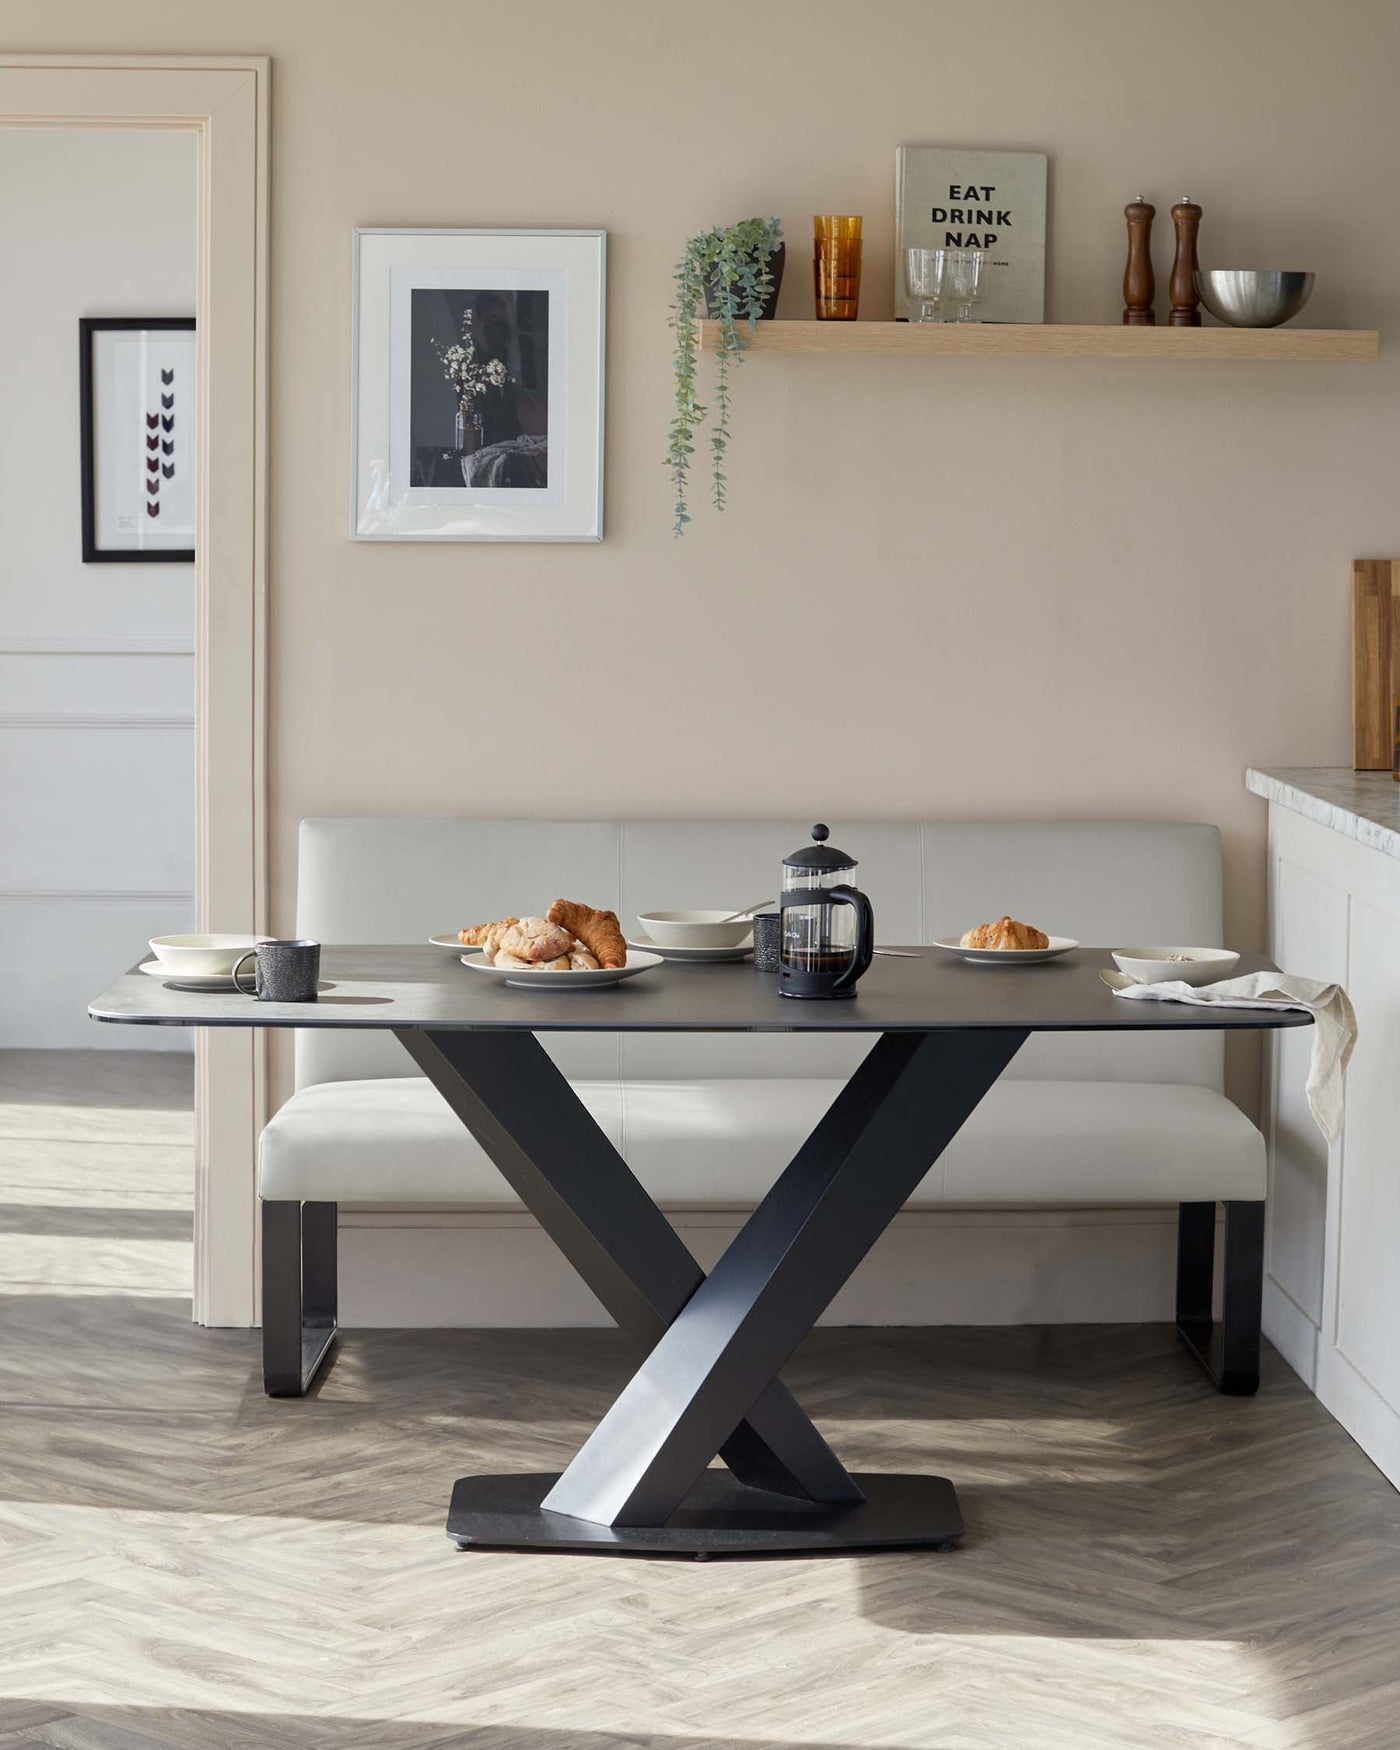 Modern minimalist dining set featuring a rectangular table with a sleek dark stone or wood finish top and a bold, black metallic X-shaped base, accompanied by a matching long bench with light beige upholstery.